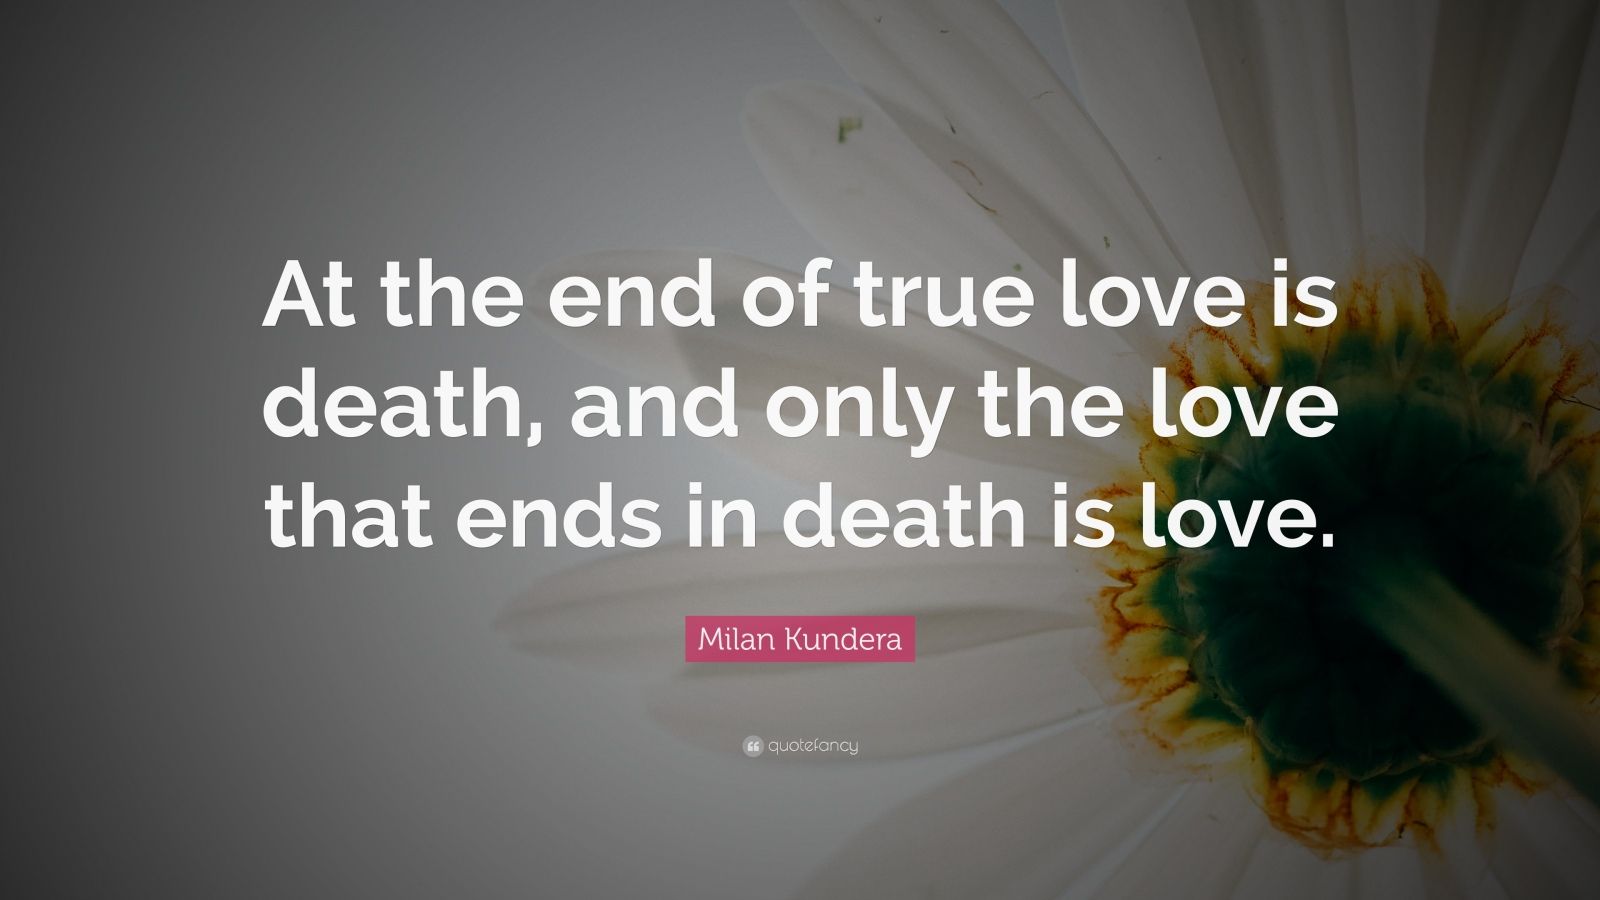 Milan Kundera Quote “At the end of true love is and only